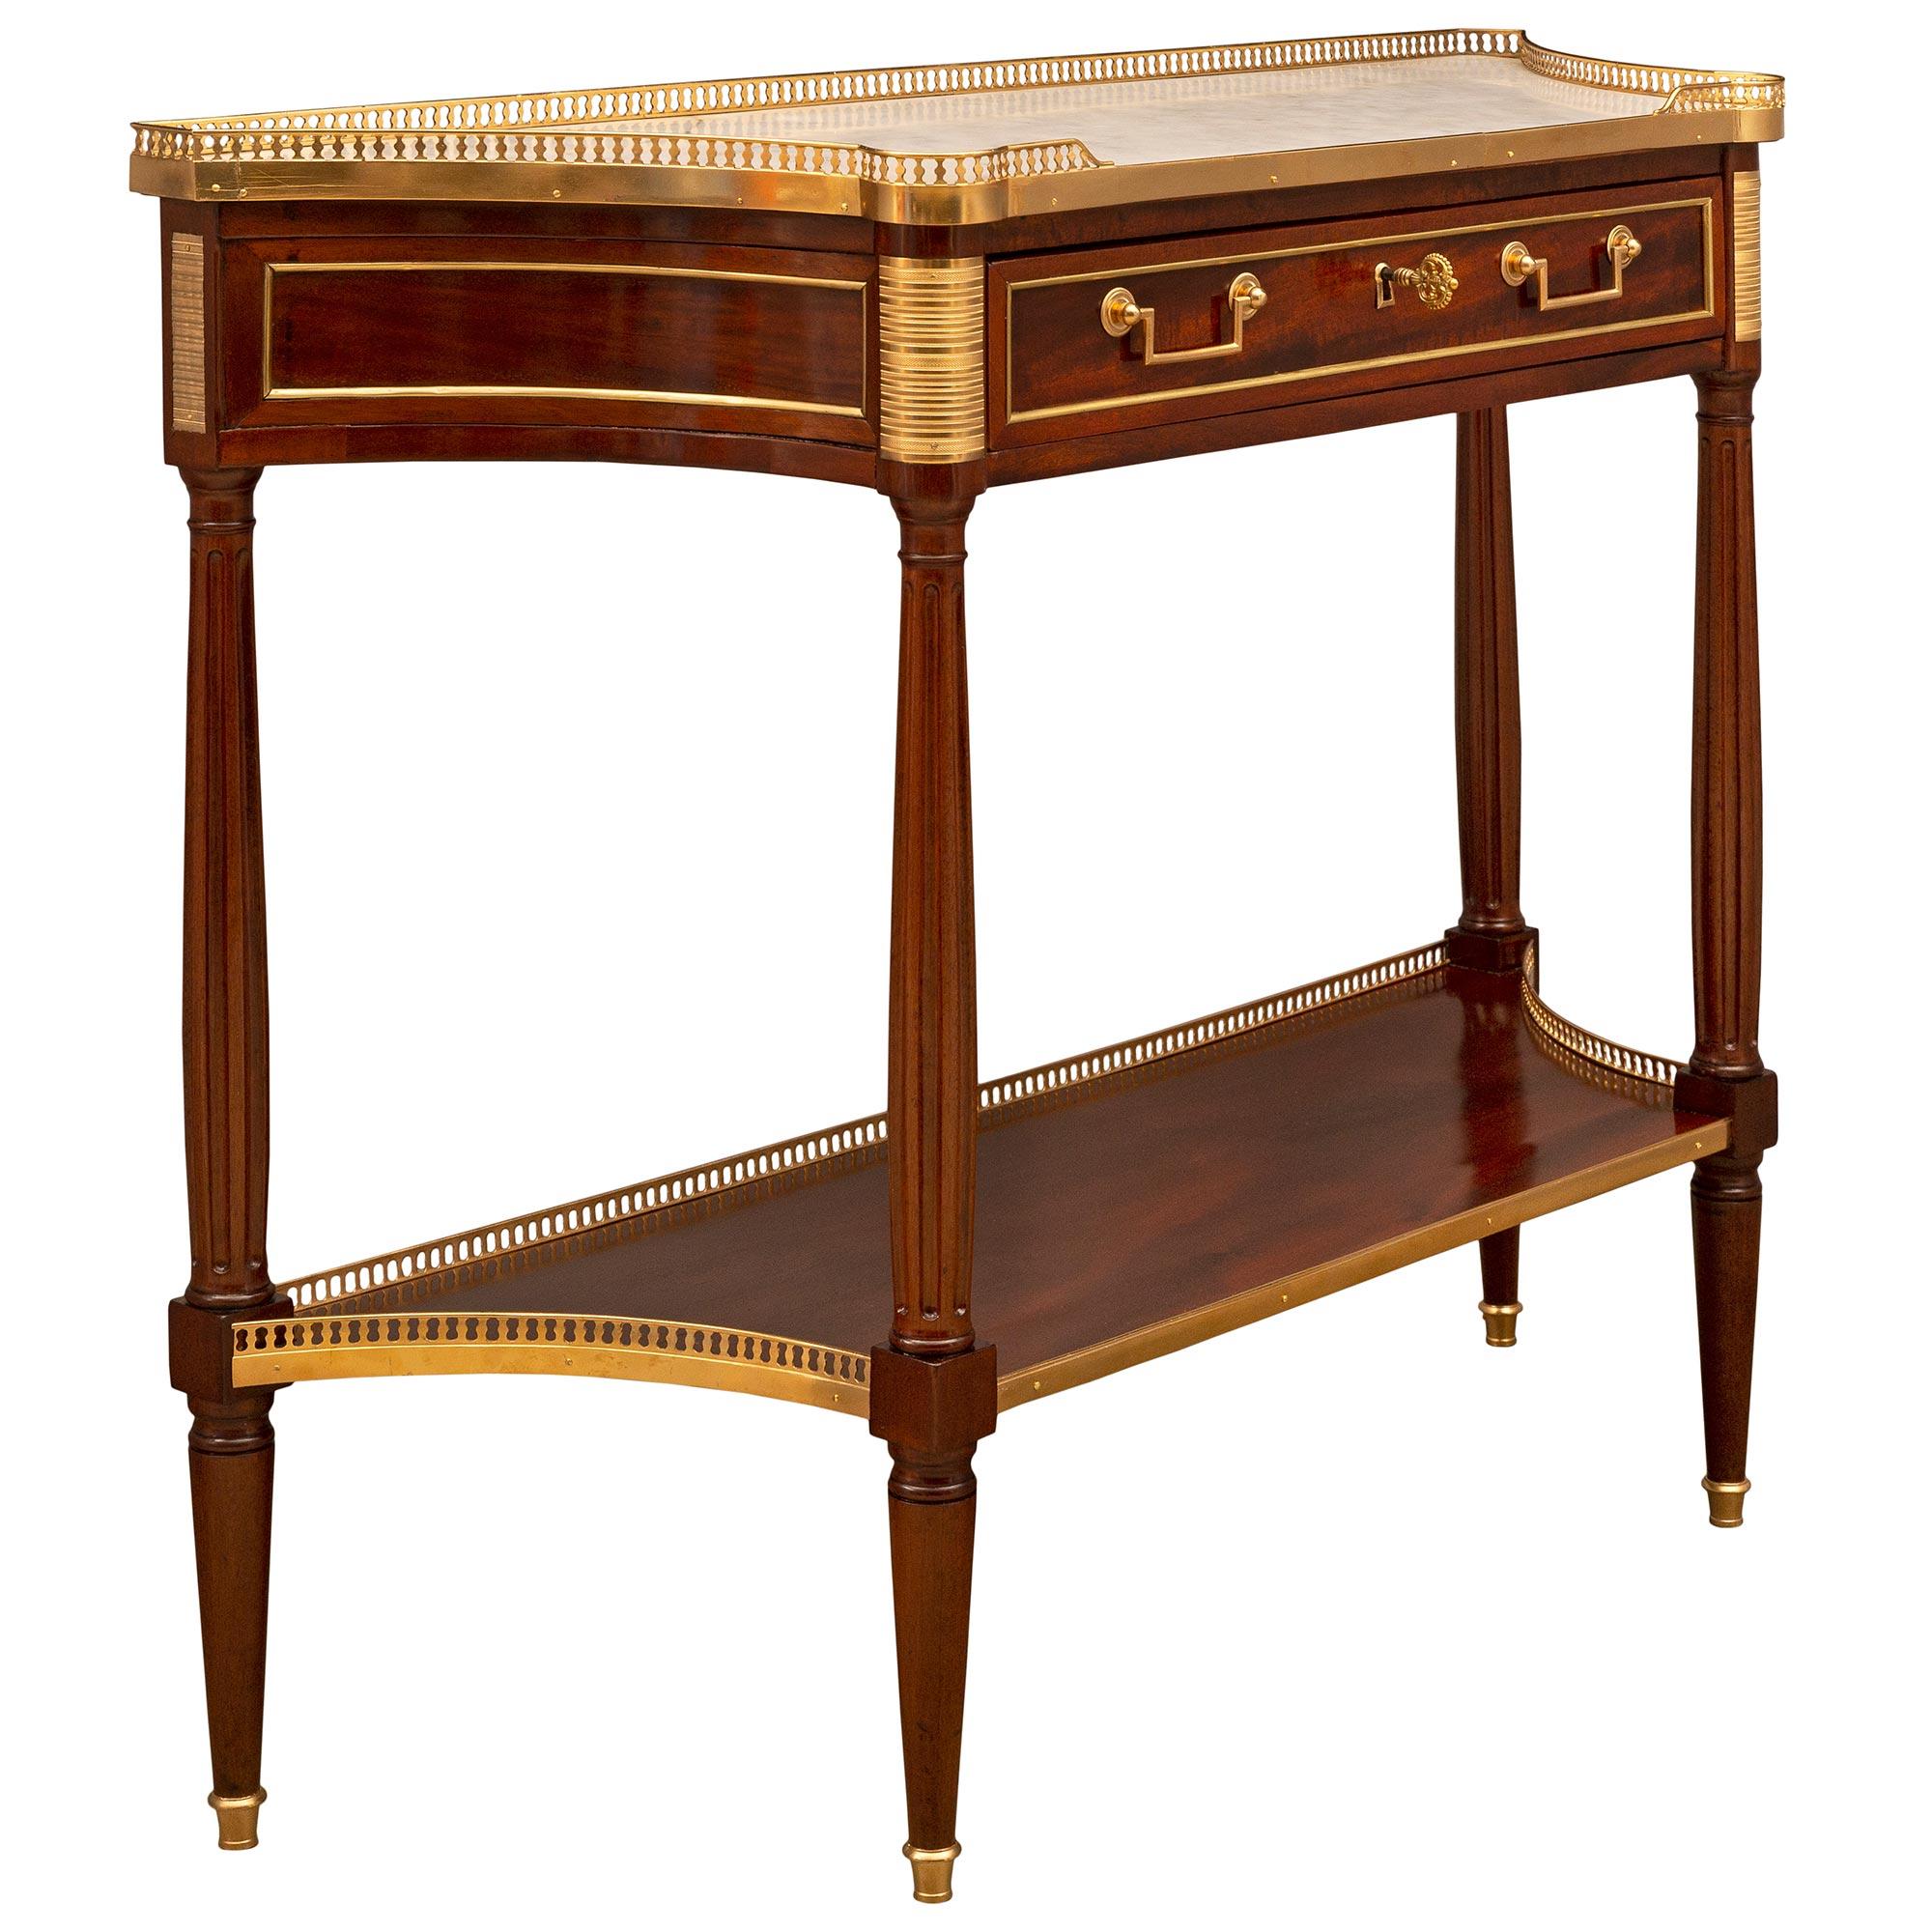 French 18th Century Louis XVI Period Mahogany, Ormolu and Marble Console In Good Condition For Sale In West Palm Beach, FL